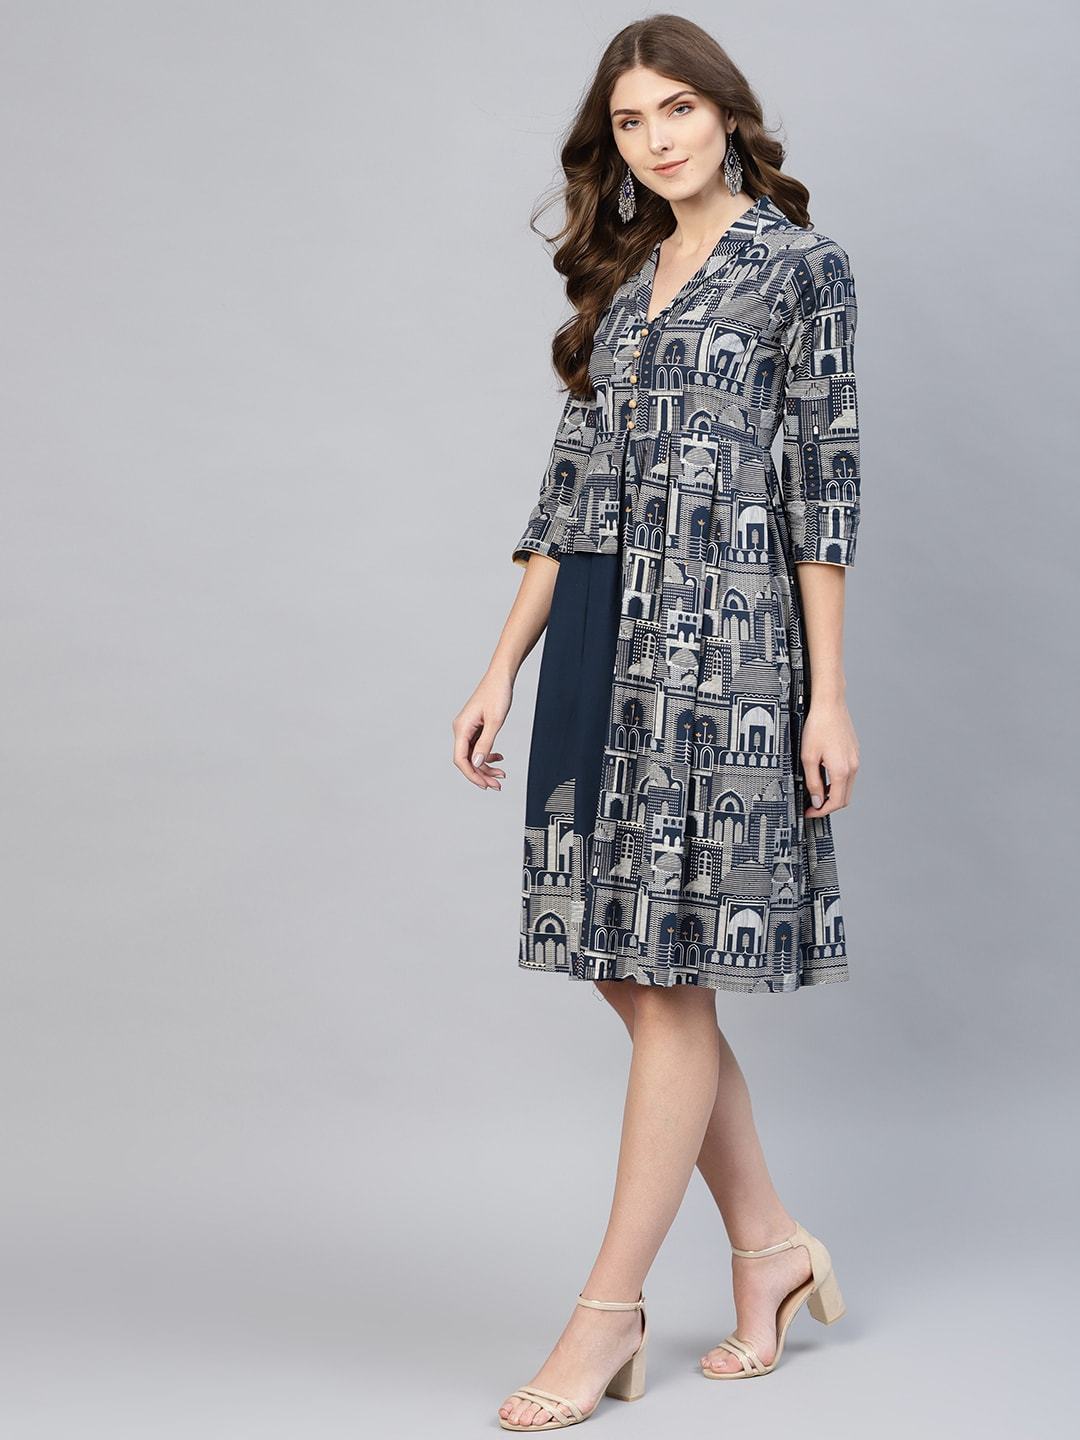 Women's  Navy & Off-White Printed Layered A-Line Dress - AKS